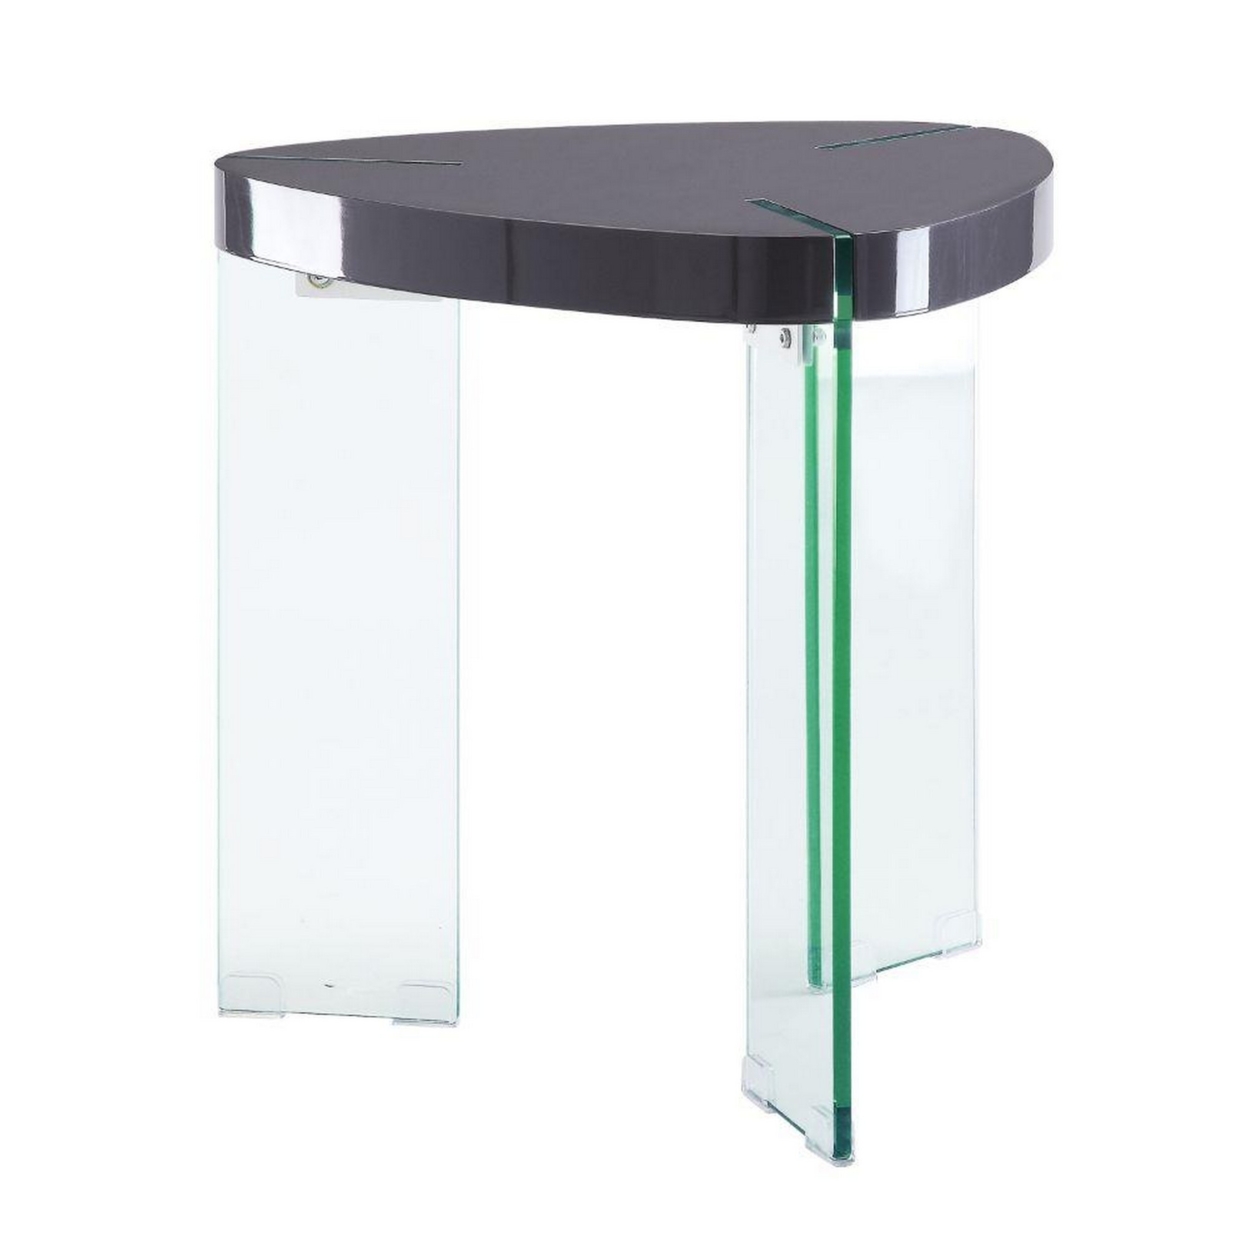 23 Inches Plectrum Top End Table With Glass Legs, Gray- Saltoro Sherpi